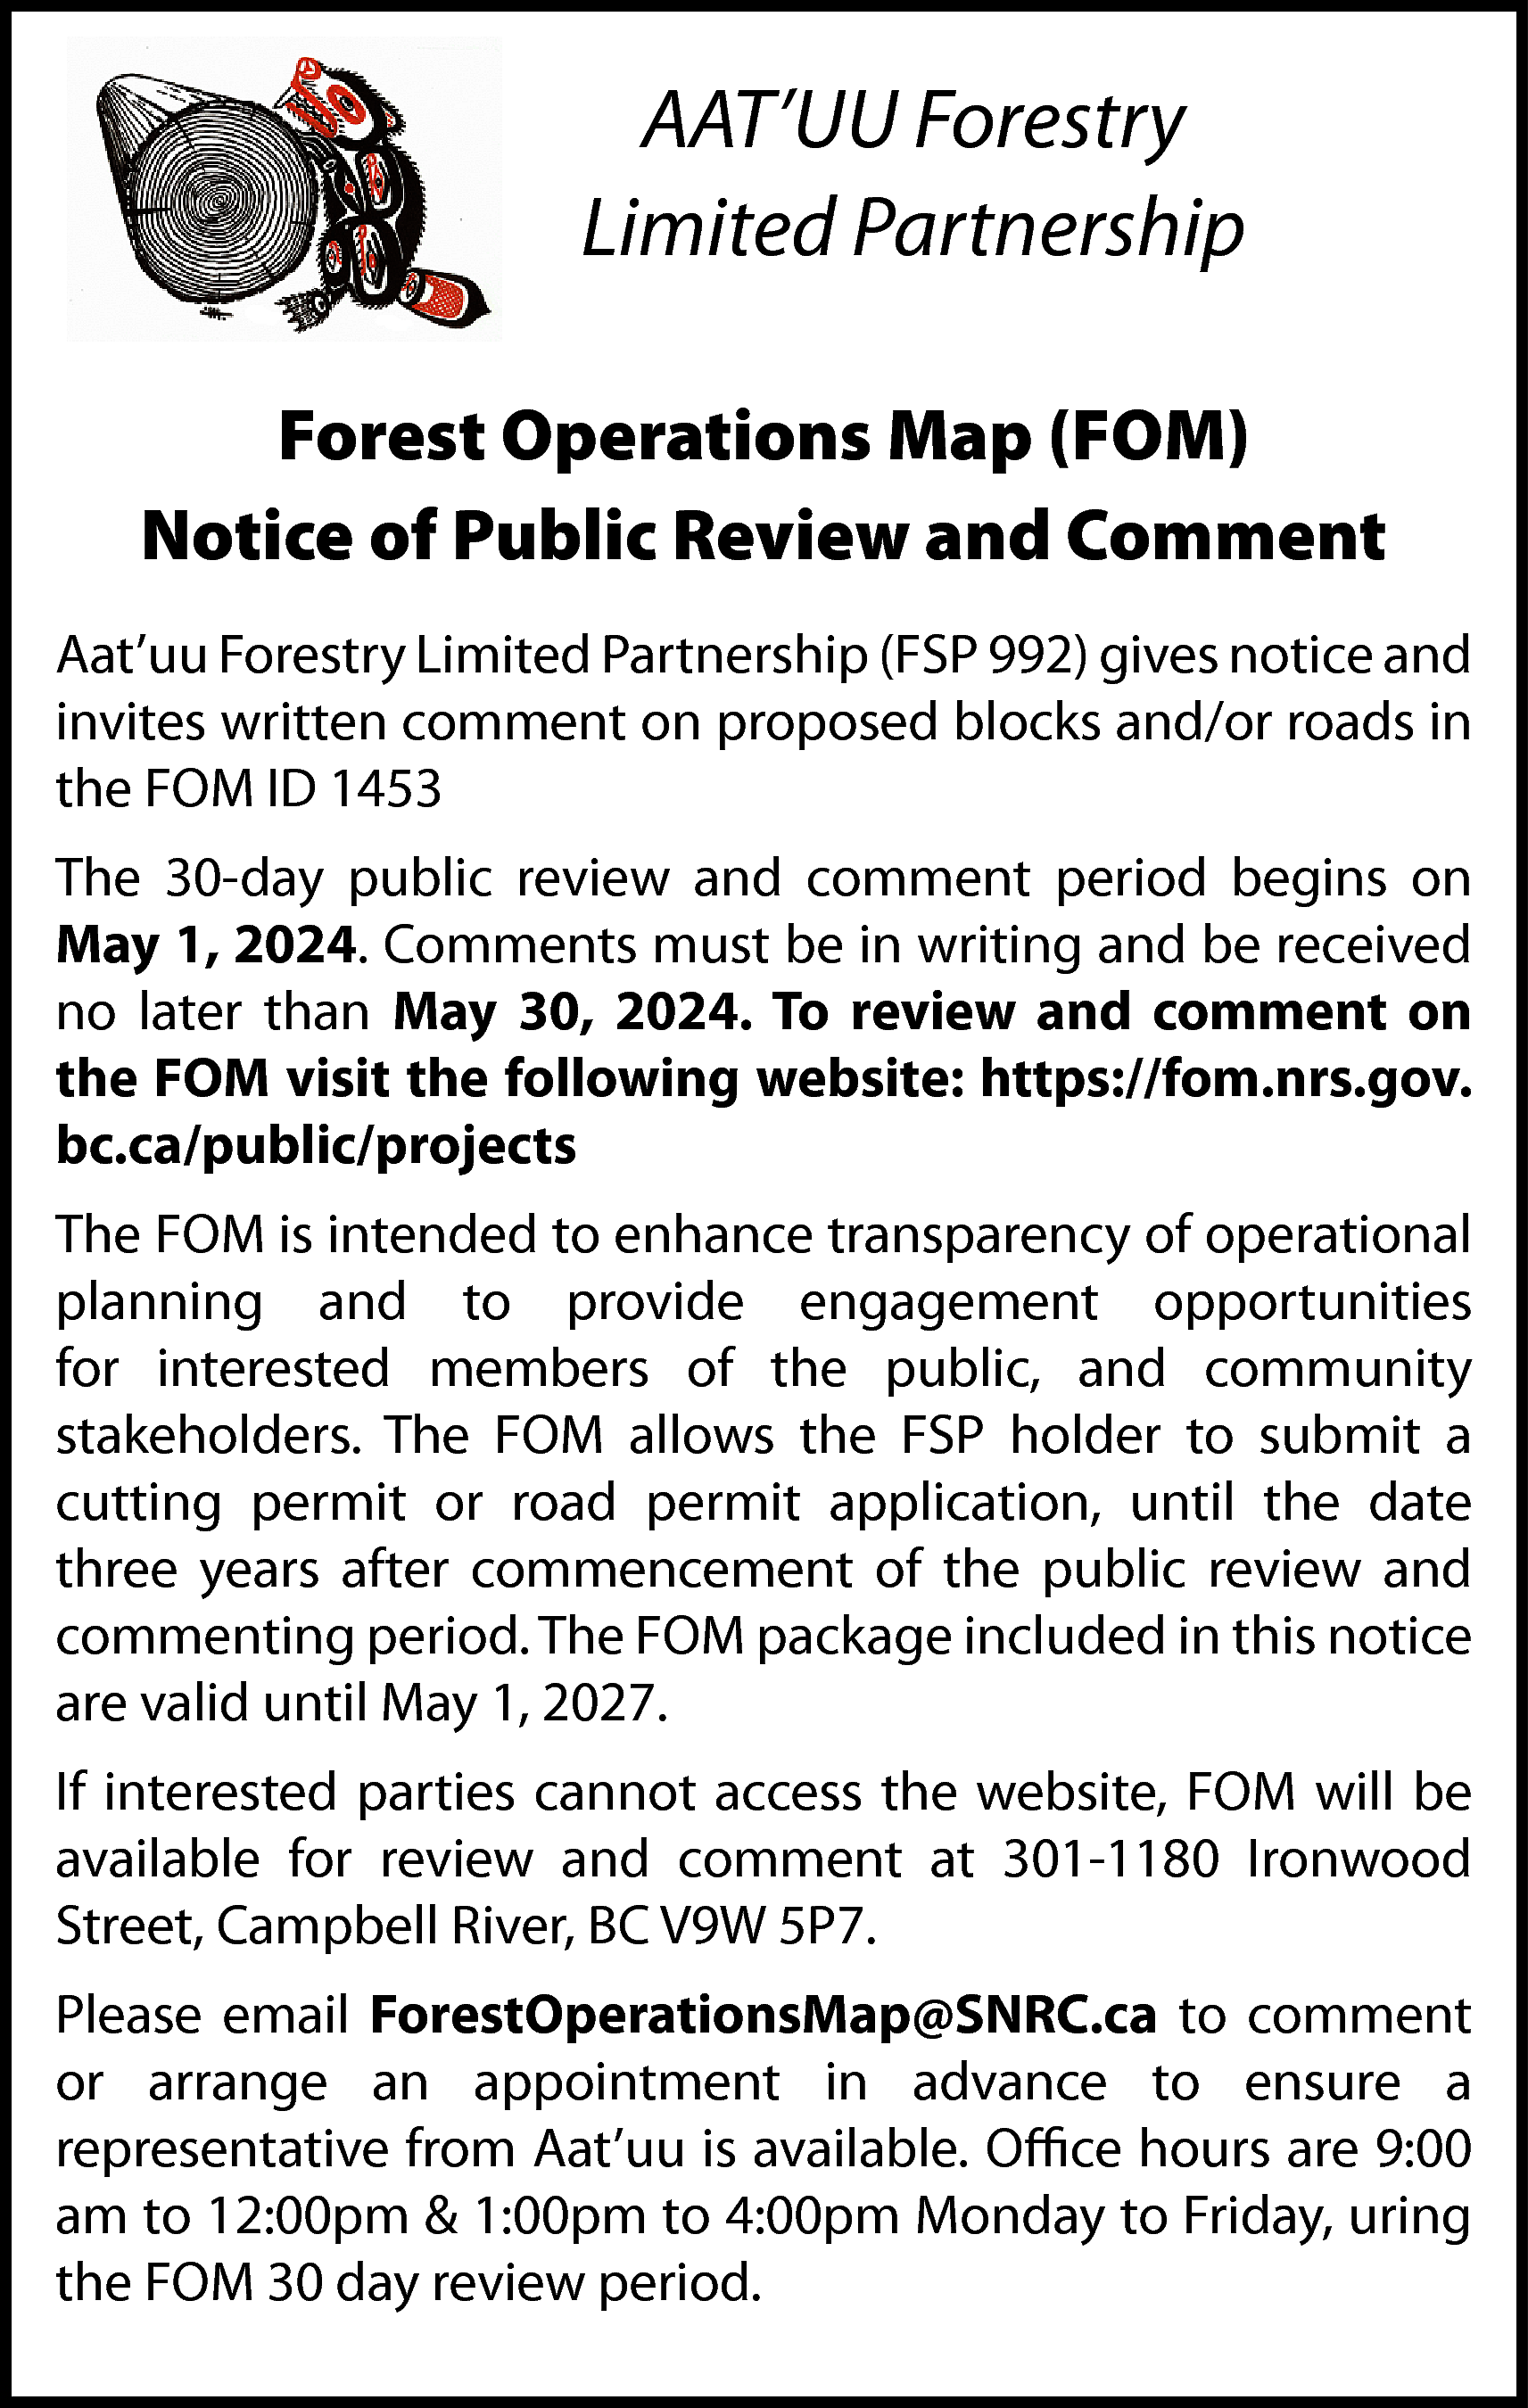 AAT’UU Forestry <br>Limited Partnership <br>Forest  AAT’UU Forestry  Limited Partnership  Forest Operations Map (FOM)  Notice of Public Review and Comment  Aat’uu Forestry Limited Partnership (FSP 992) gives notice and  invites written comment on proposed blocks and/or roads in  the FOM ID 1453  The 30-day public review and comment period begins on  May 1, 2024. Comments must be in writing and be received  no later than May 30, 2024. To review and comment on  the FOM visit the following website: https://fom.nrs.gov.  bc.ca/public/projects  The FOM is intended to enhance transparency of operational  planning and to provide engagement opportunities  for interested members of the public, and community  stakeholders. The FOM allows the FSP holder to submit a  cutting permit or road permit application, until the date  three years after commencement of the public review and  commenting period. The FOM package included in this notice  are valid until May 1, 2027.  If interested parties cannot access the website, FOM will be  available for review and comment at 301-1180 Ironwood  Street, Campbell River, BC V9W 5P7.  Please email ForestOperationsMap@SNRC.ca to comment  or arrange an appointment in advance to ensure a  representative from Aat’uu is available. Office hours are 9:00  am to 12:00pm & 1:00pm to 4:00pm Monday to Friday, uring  the FOM 30 day review period.    